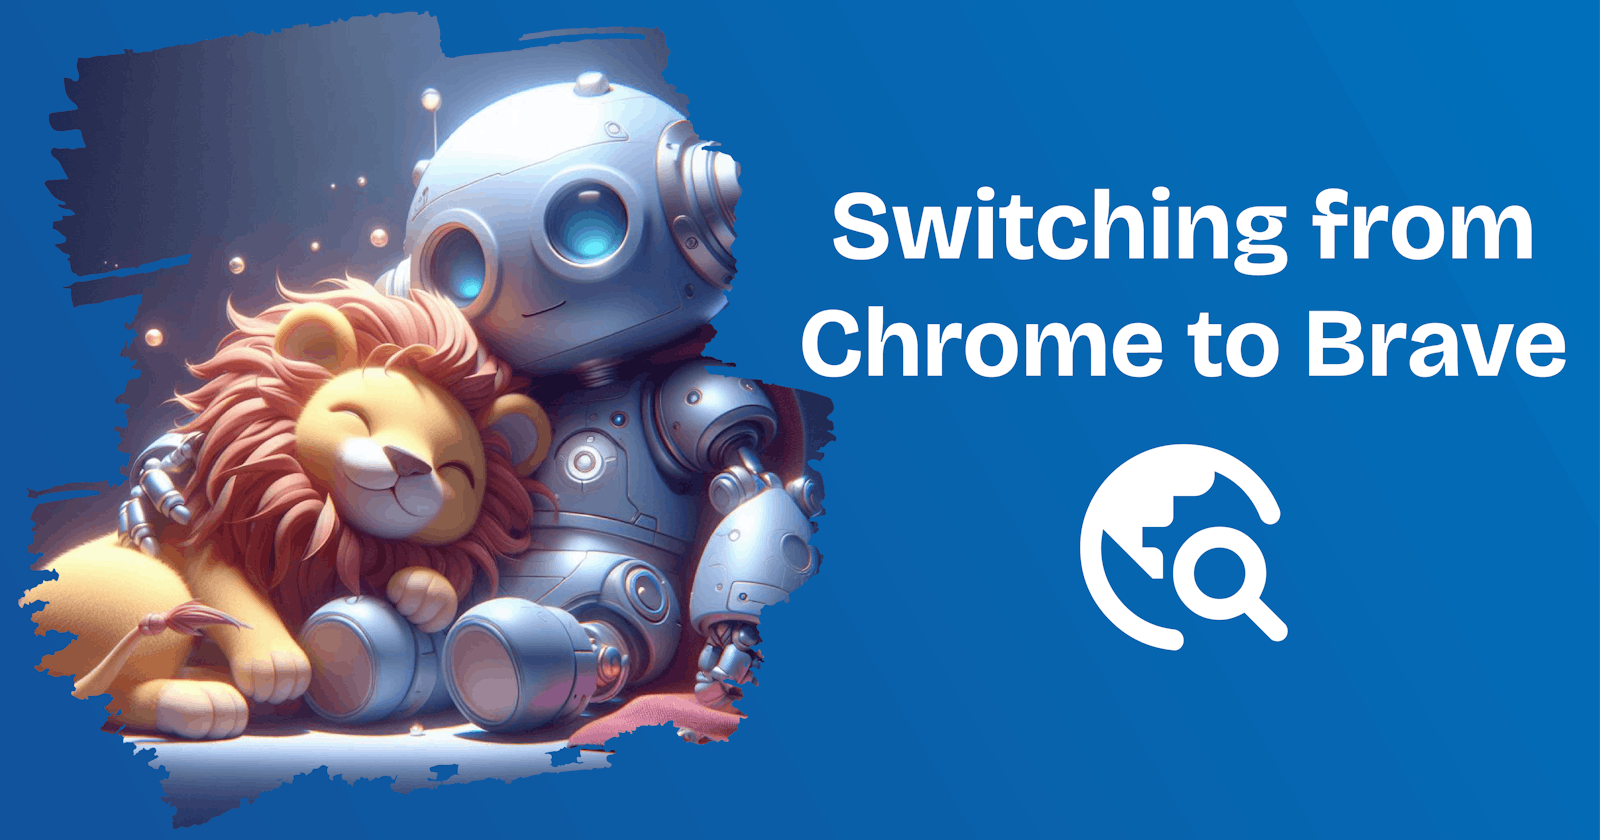 Switching from Chrome to Brave